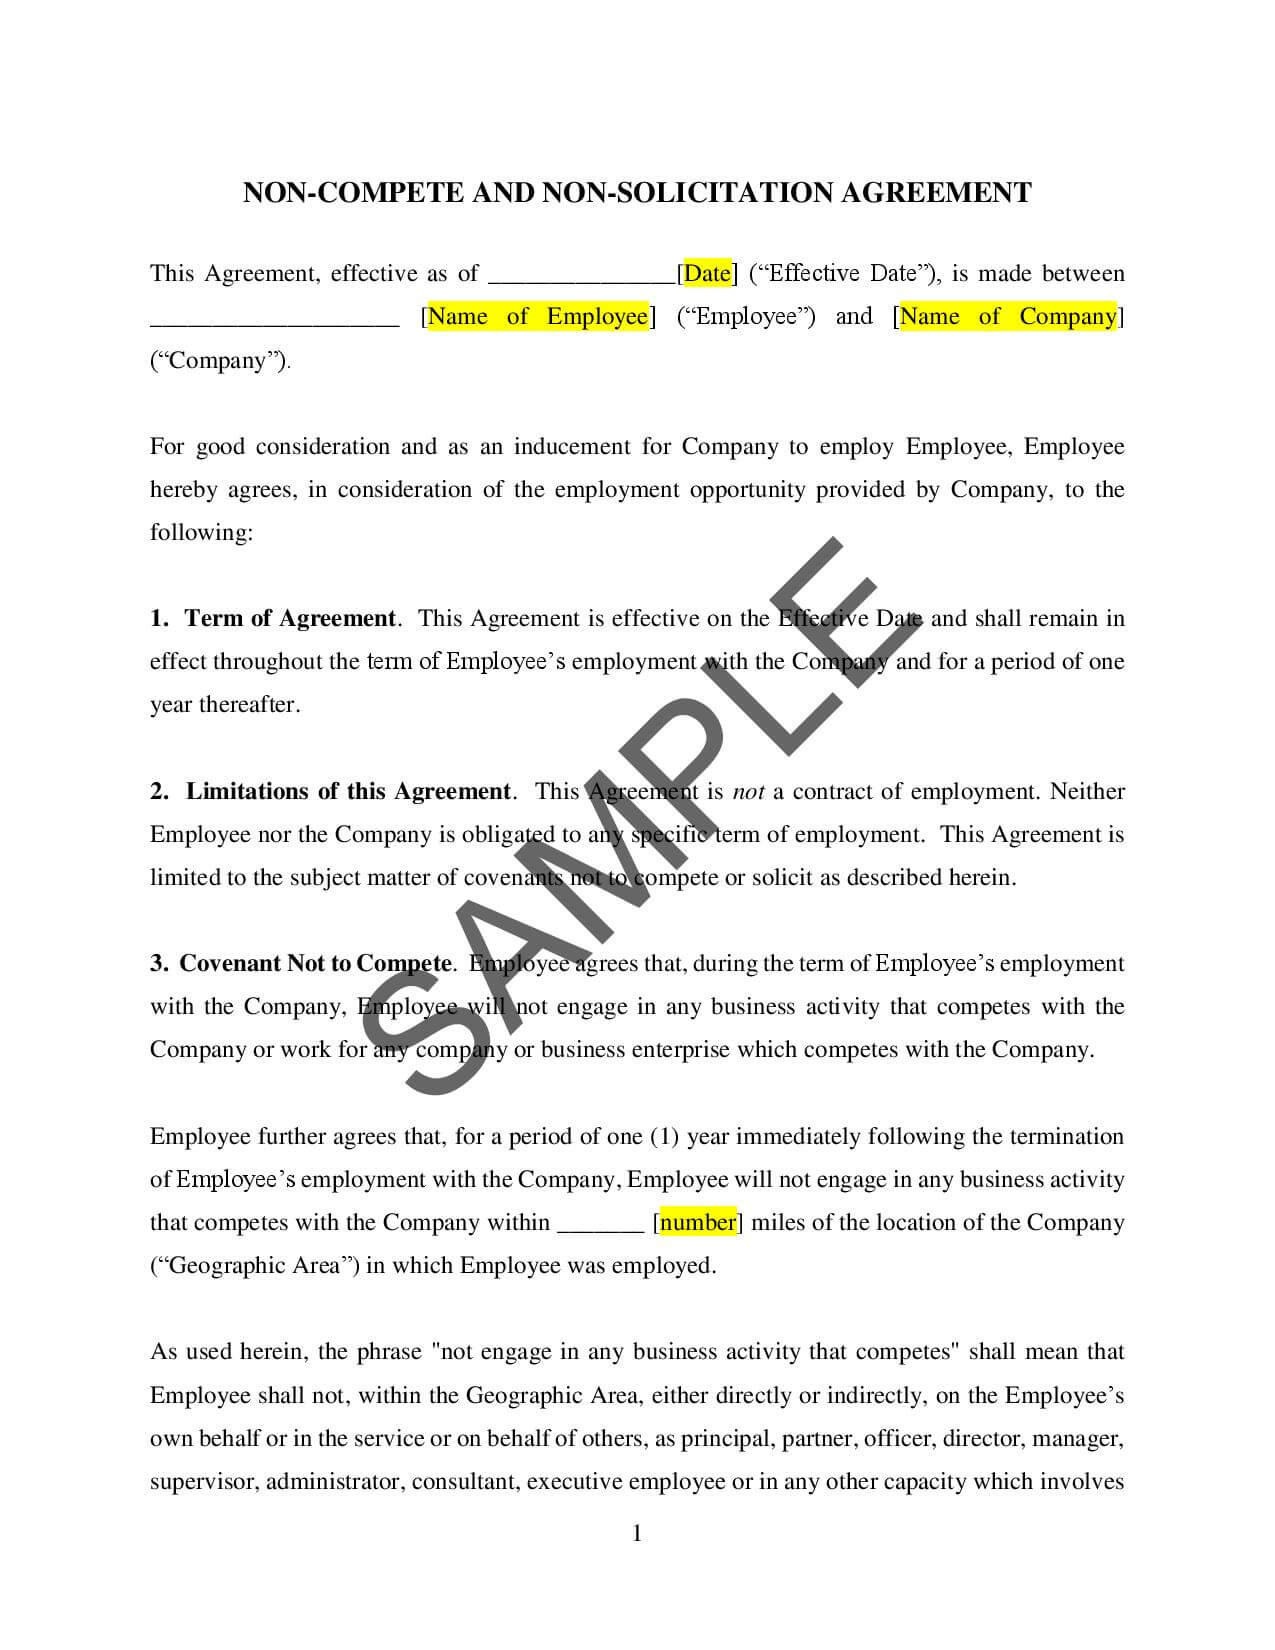 Non Compete Agreement Meaning Non Compete Agreement For Employees